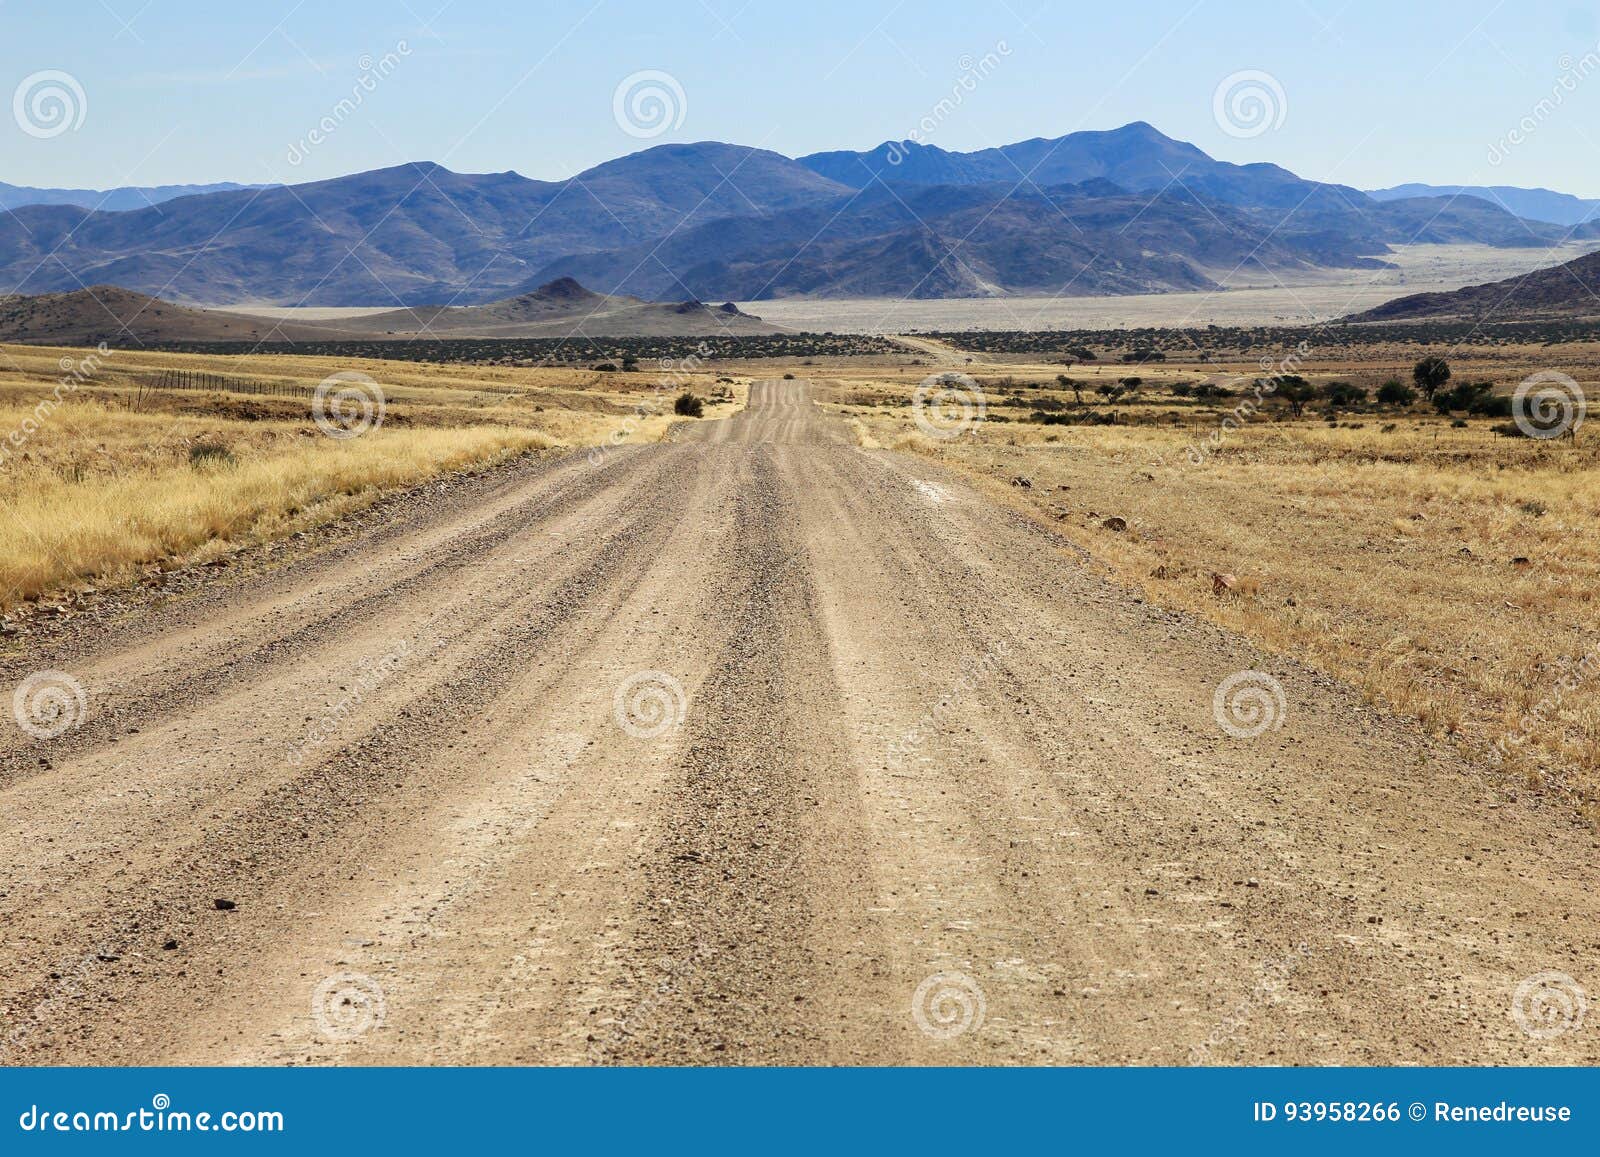 Bumpy Road To Mountains And Through Dry Desert Grassland Stock Photo Image Of Direction Arid